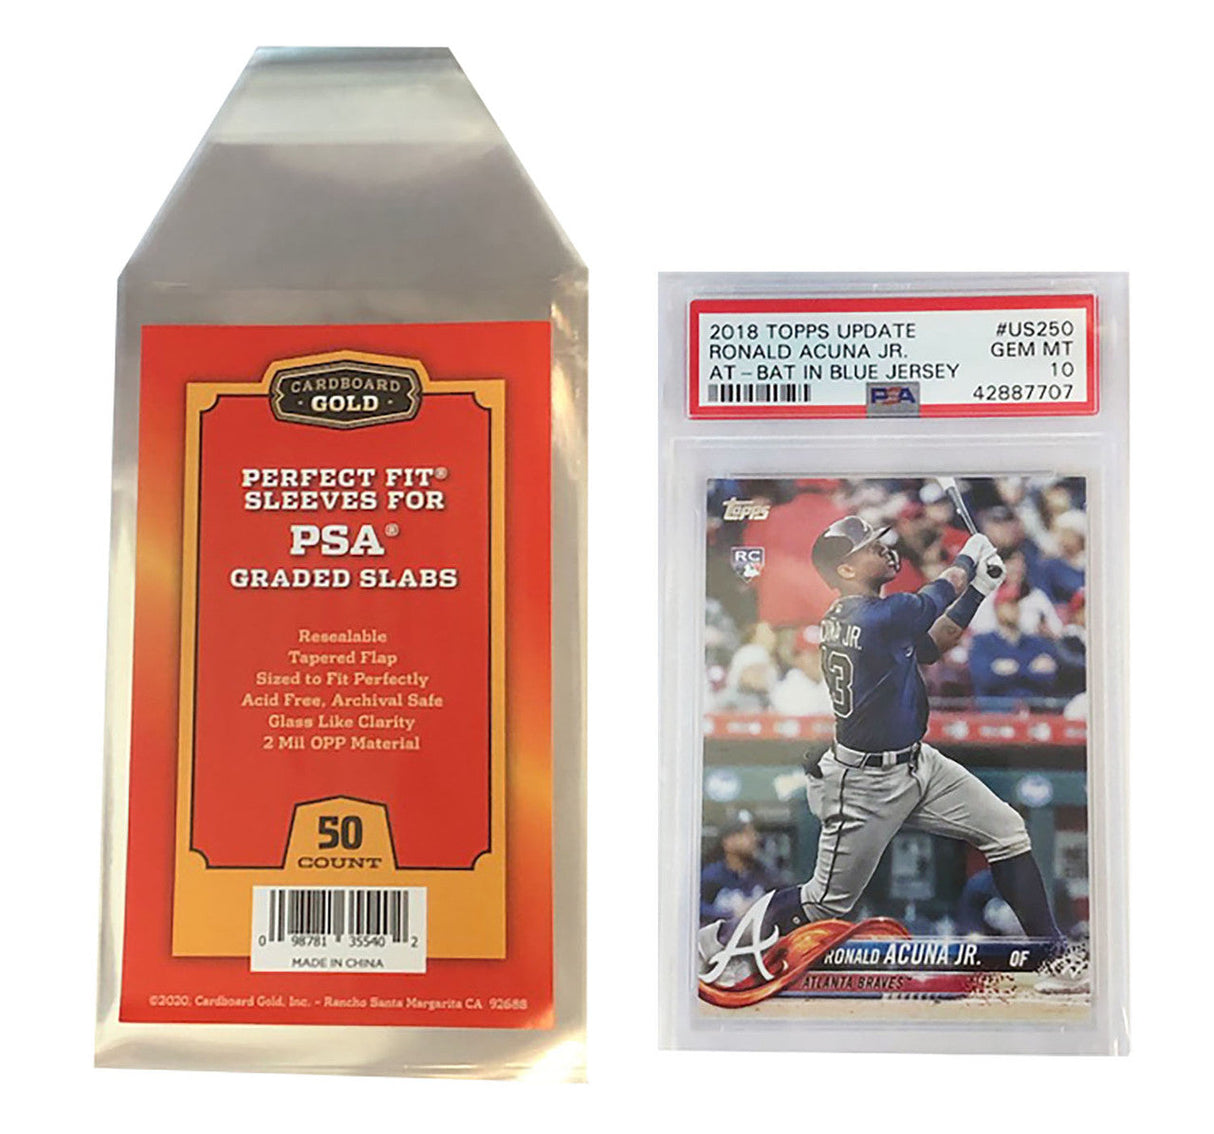 500ct Perfect Fit Graded Cards Sleeves PSA Size No Logo - Cardboard Gold